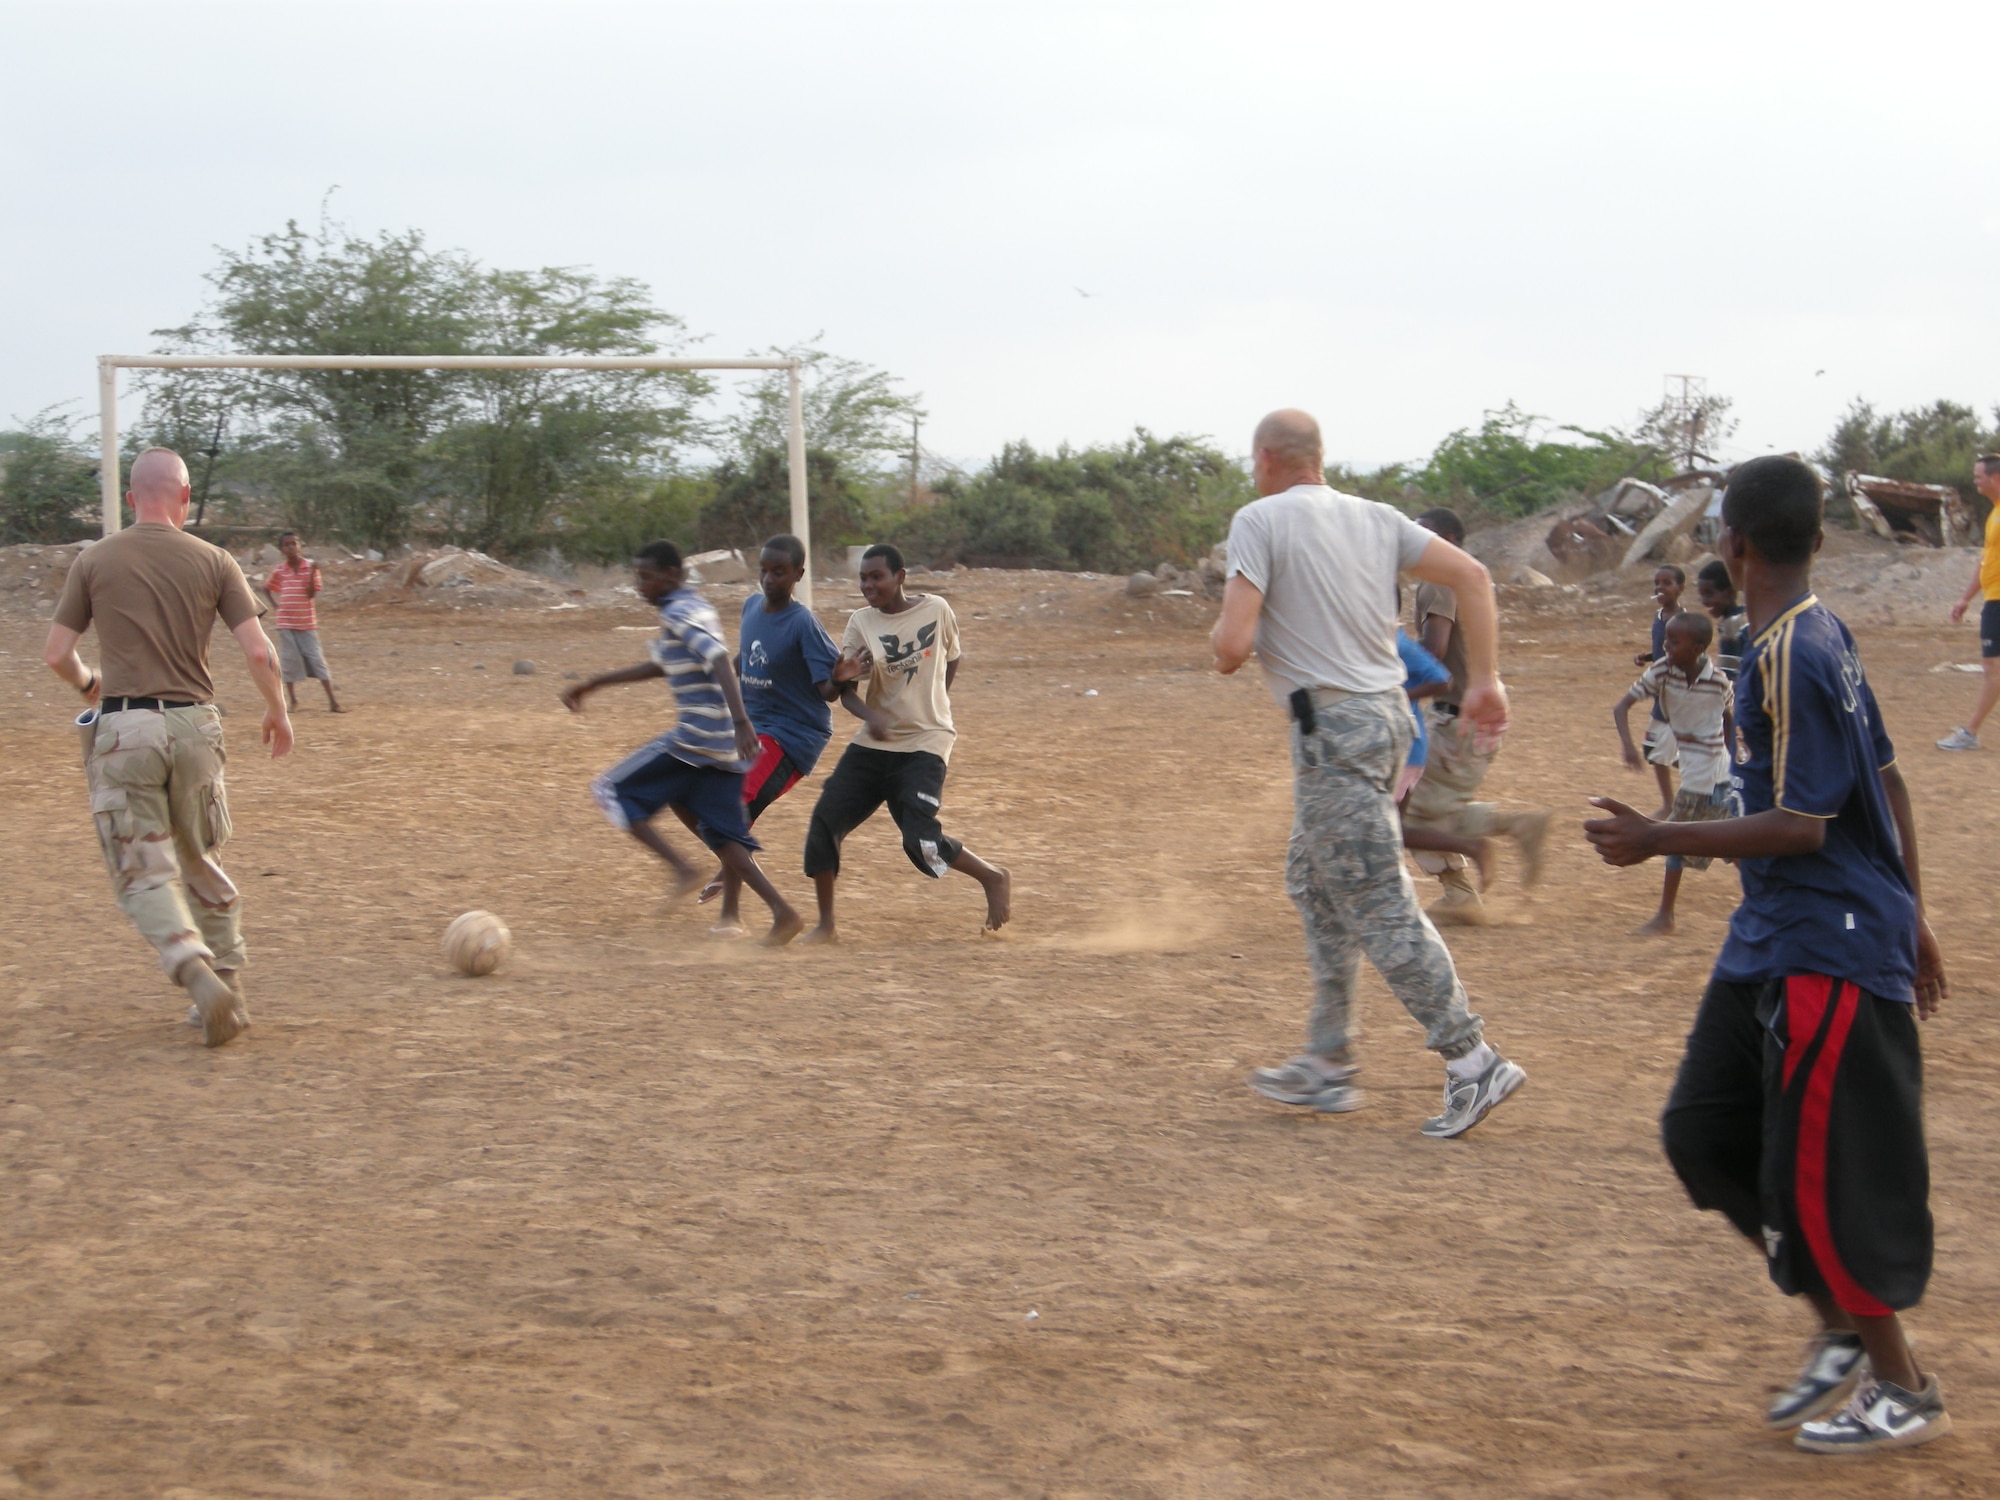 MSgt David Zibell playing soccer in Uganda with local children from the boy’s orphage.